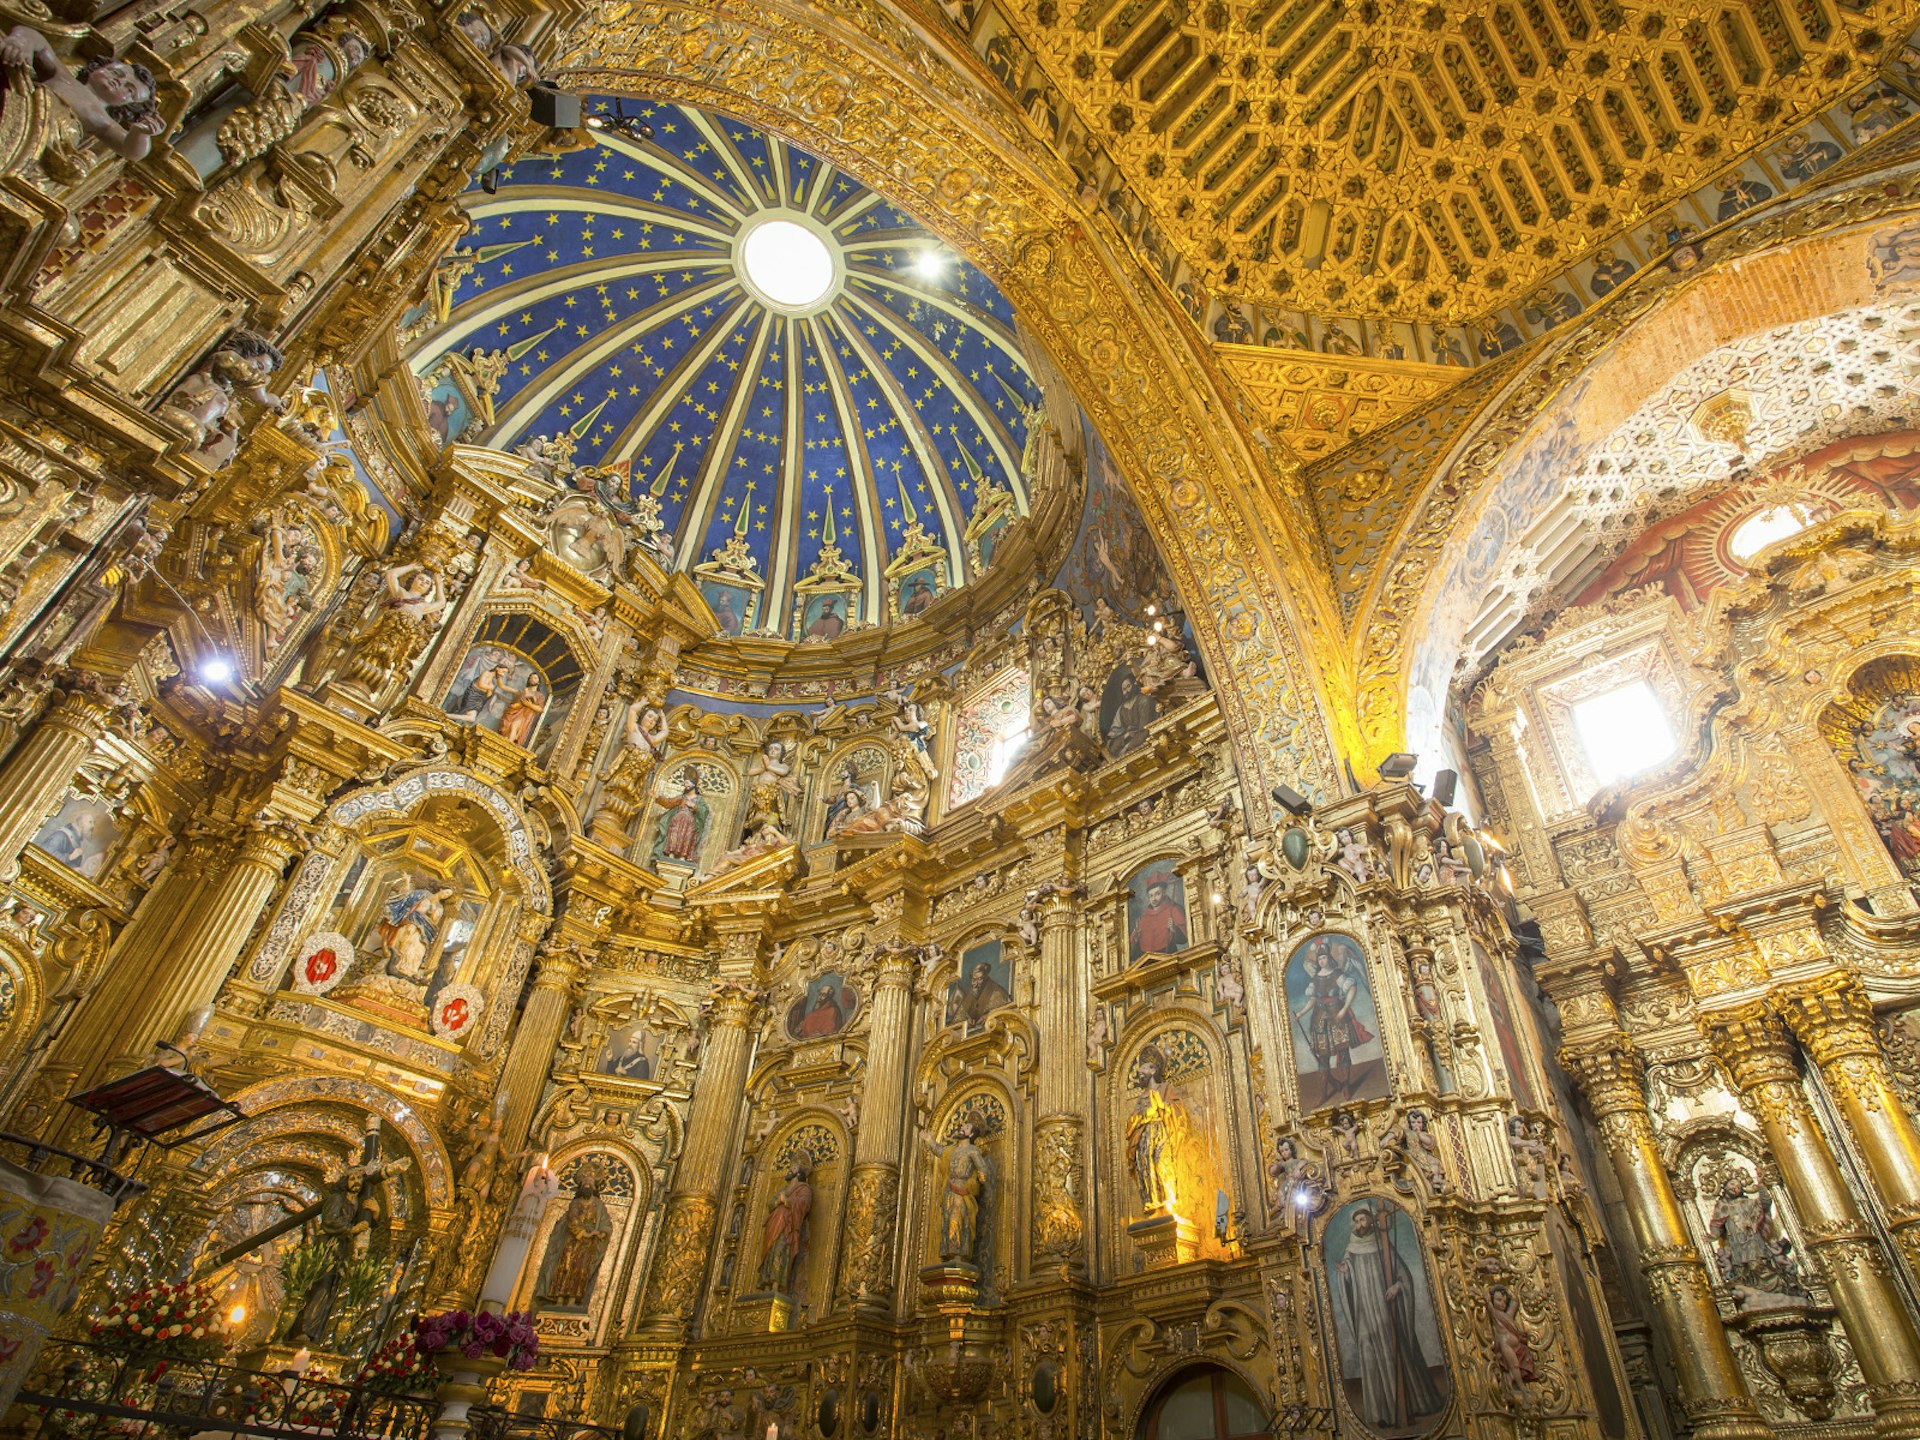 The church of San Francisco's gilded interior © Philip Lee Harvey / Lonely Planet